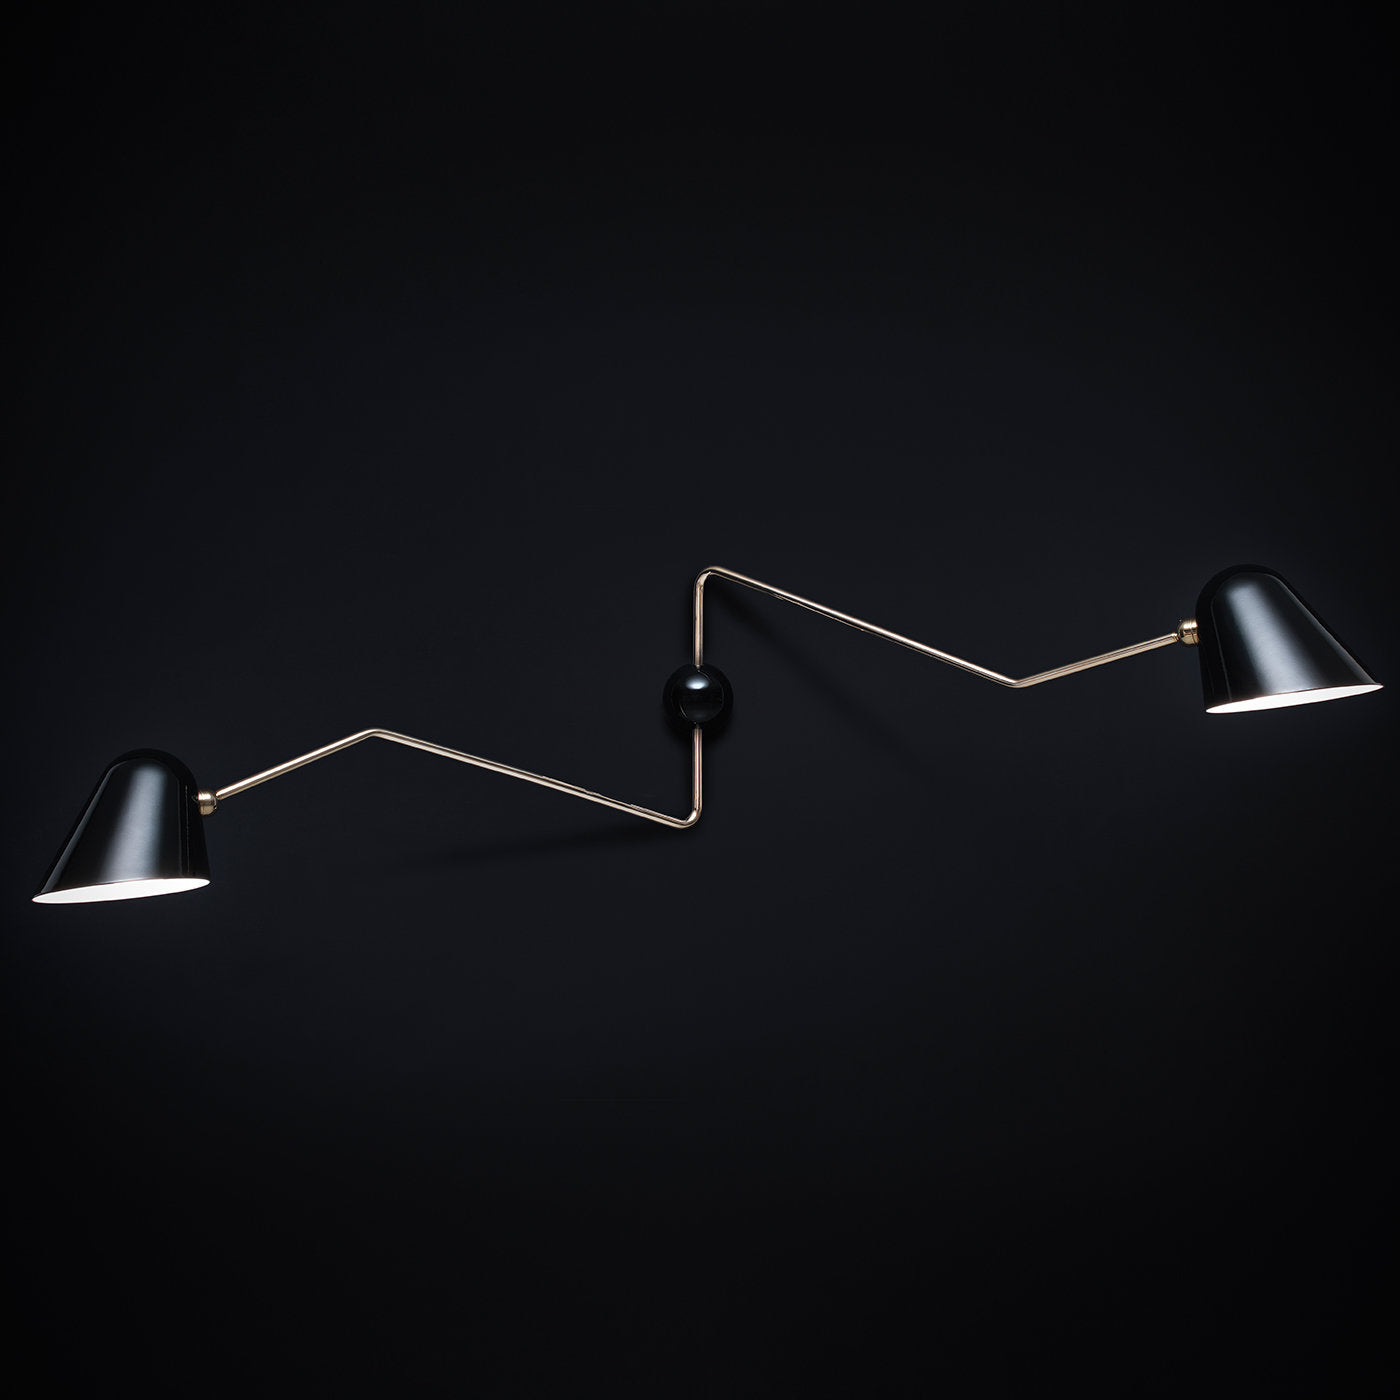 Beghina Two-Armed Sconce Lamp by Guarneri - Alternative view 2